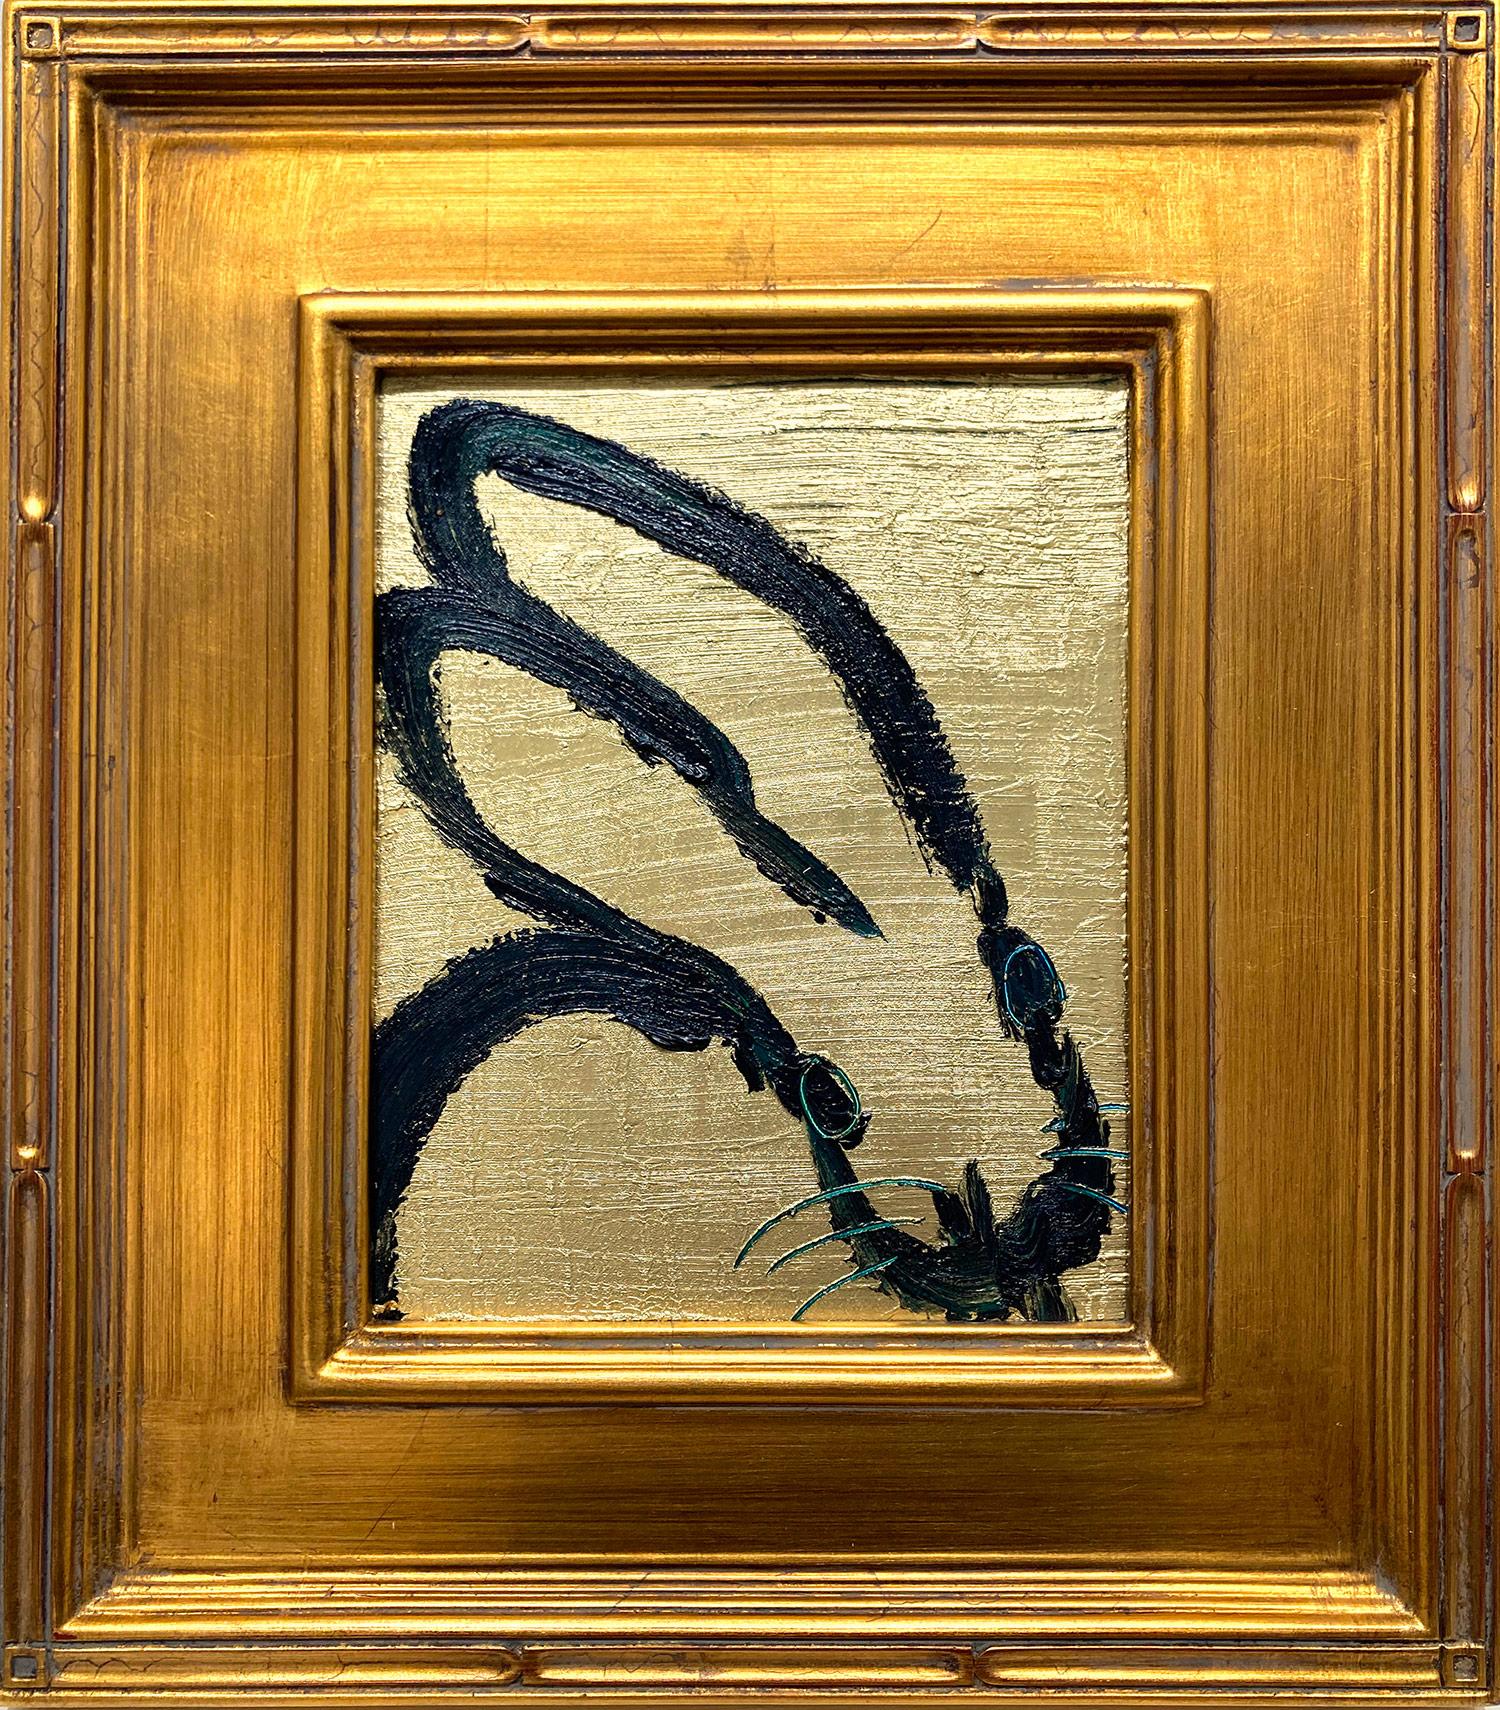 Hunt Slonem Abstract Painting - "Golden Leap" Black Outlined Bunny on Gold Background Oil Painting on Wood Panel